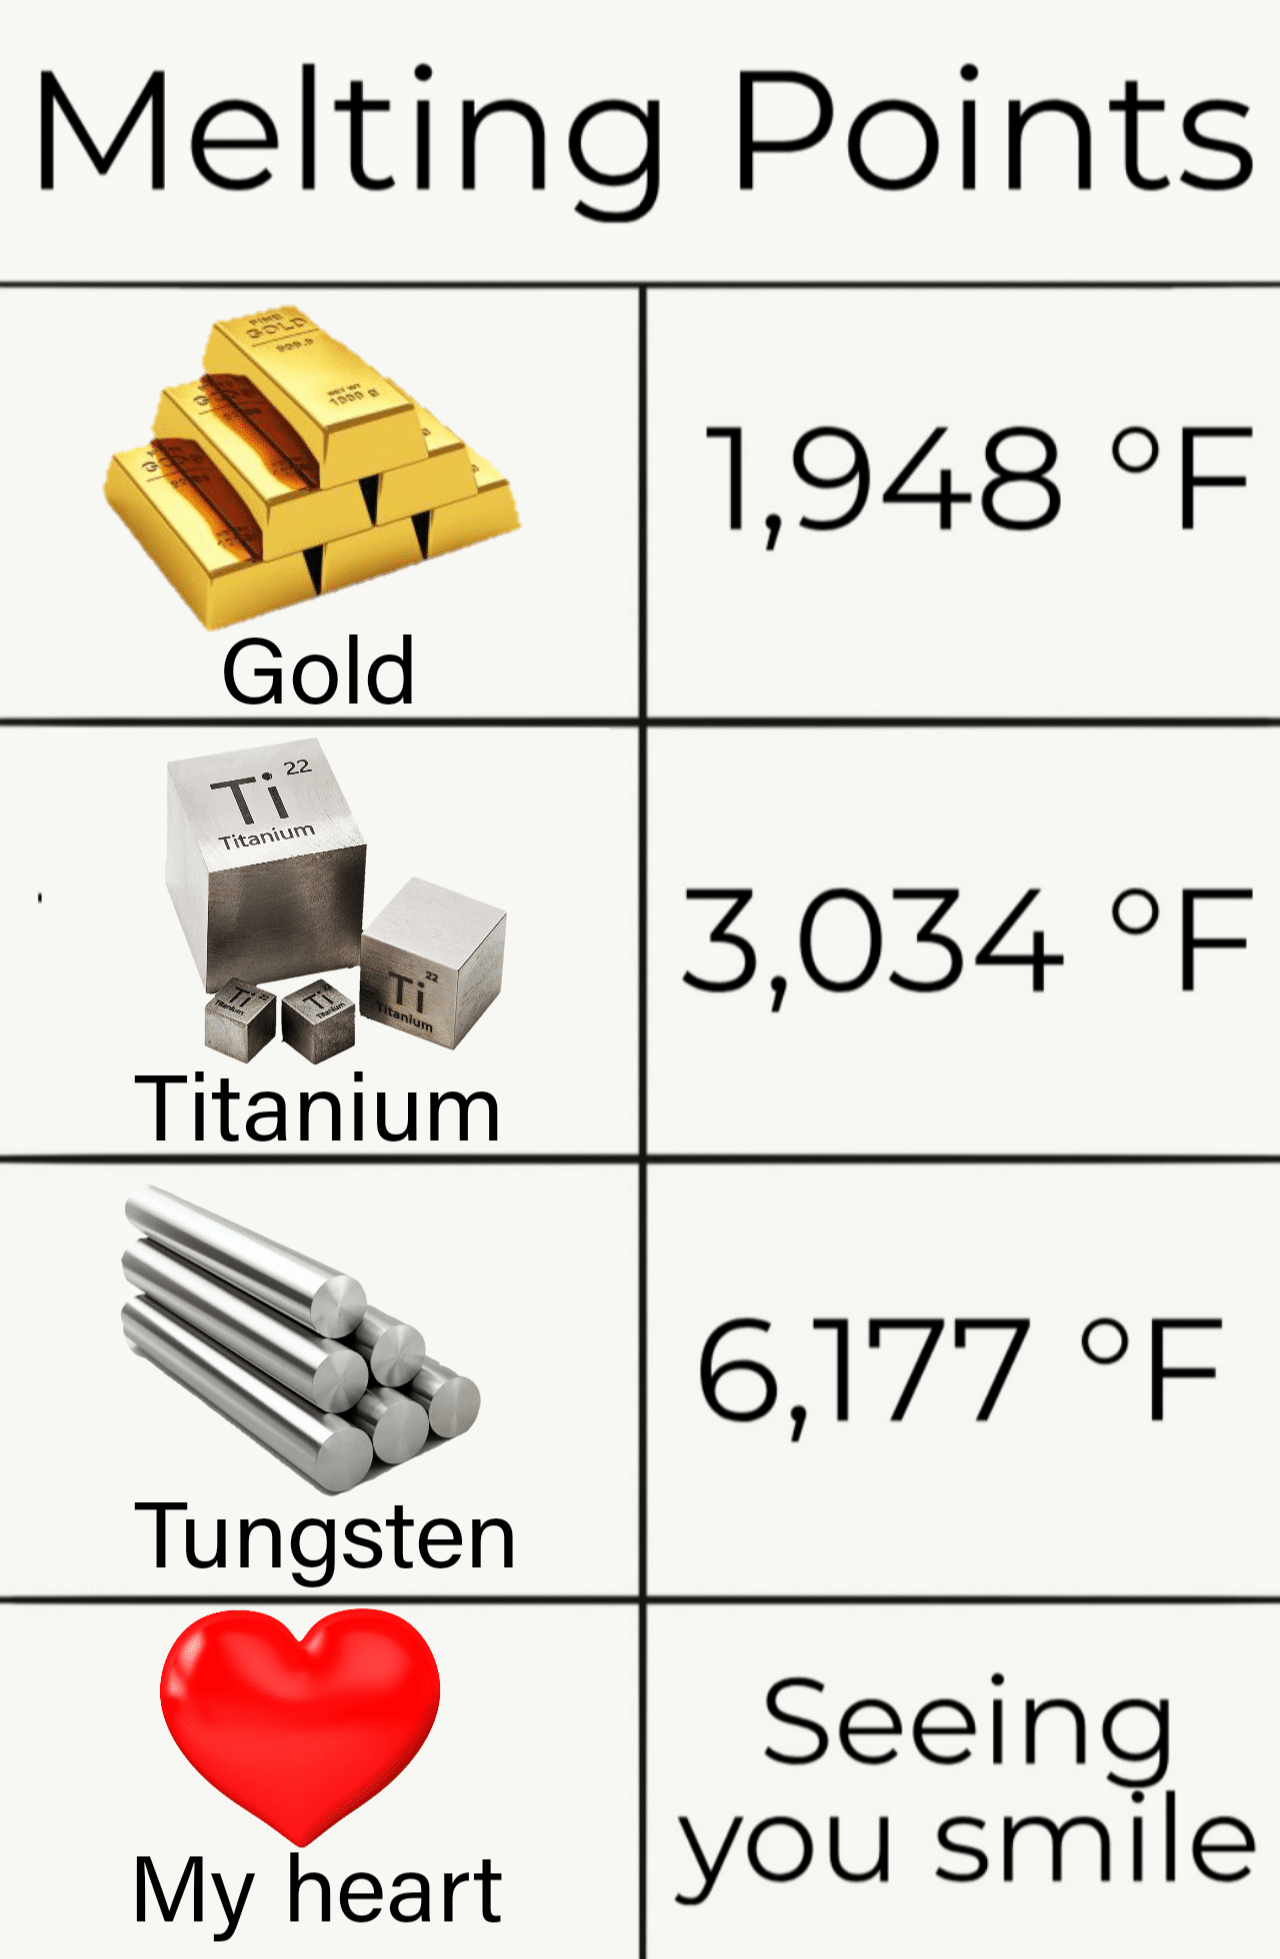 Wholesome memes,  Wholesome Memes Wholesome memes,  text: Melting Points Gold Titanium Tungsten My heart 1,948 OF 3,034 OF 6,177 OF you smile 